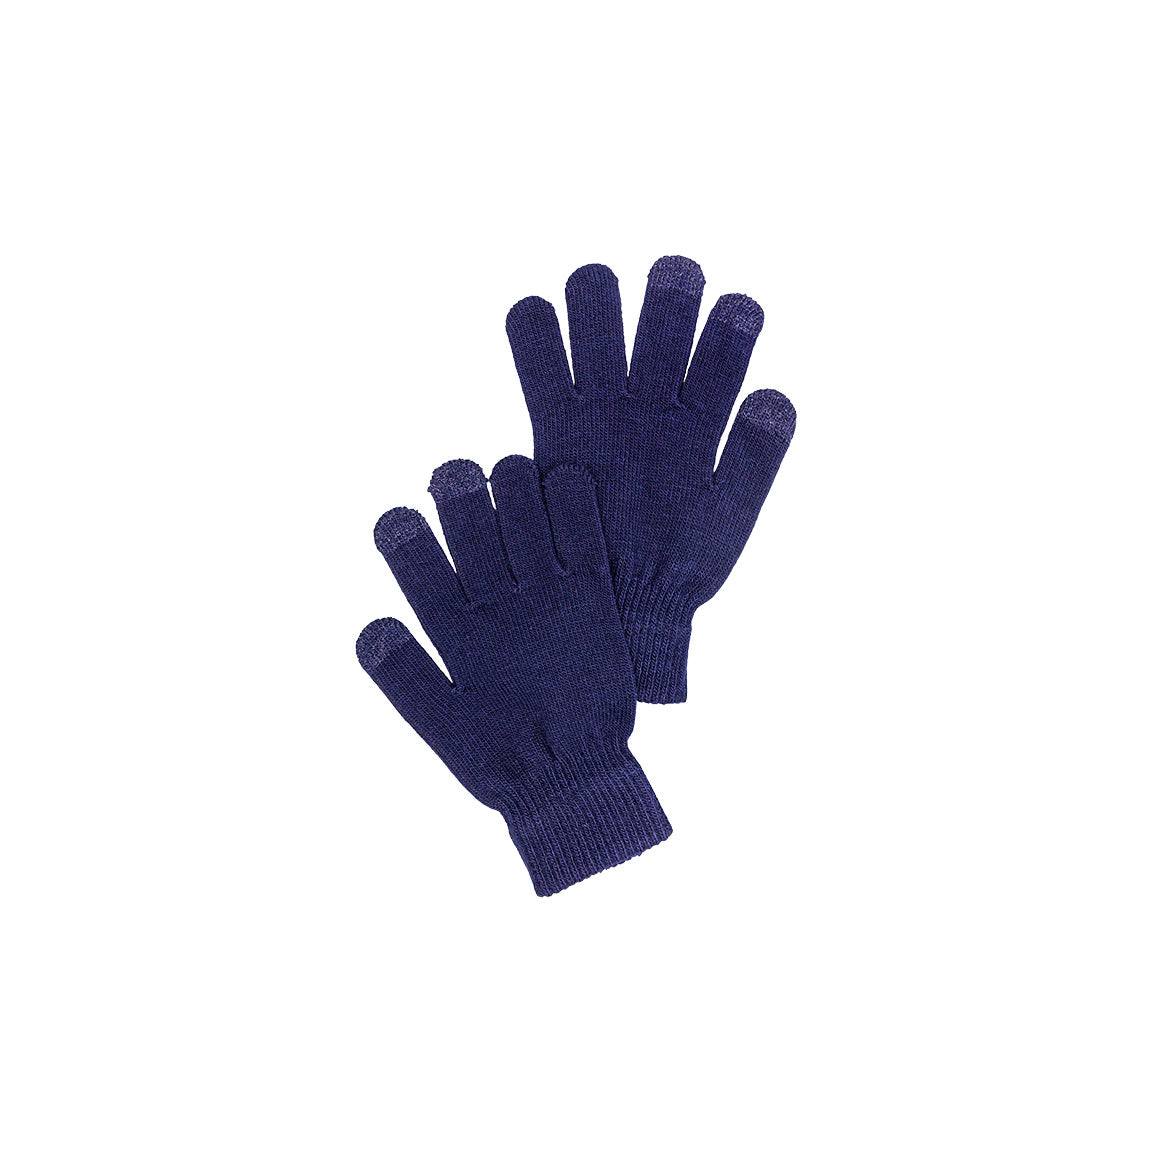 A pair of navy blue knitted gloves, with the thumb, index, and middle fingers designed for touch screen interaction.